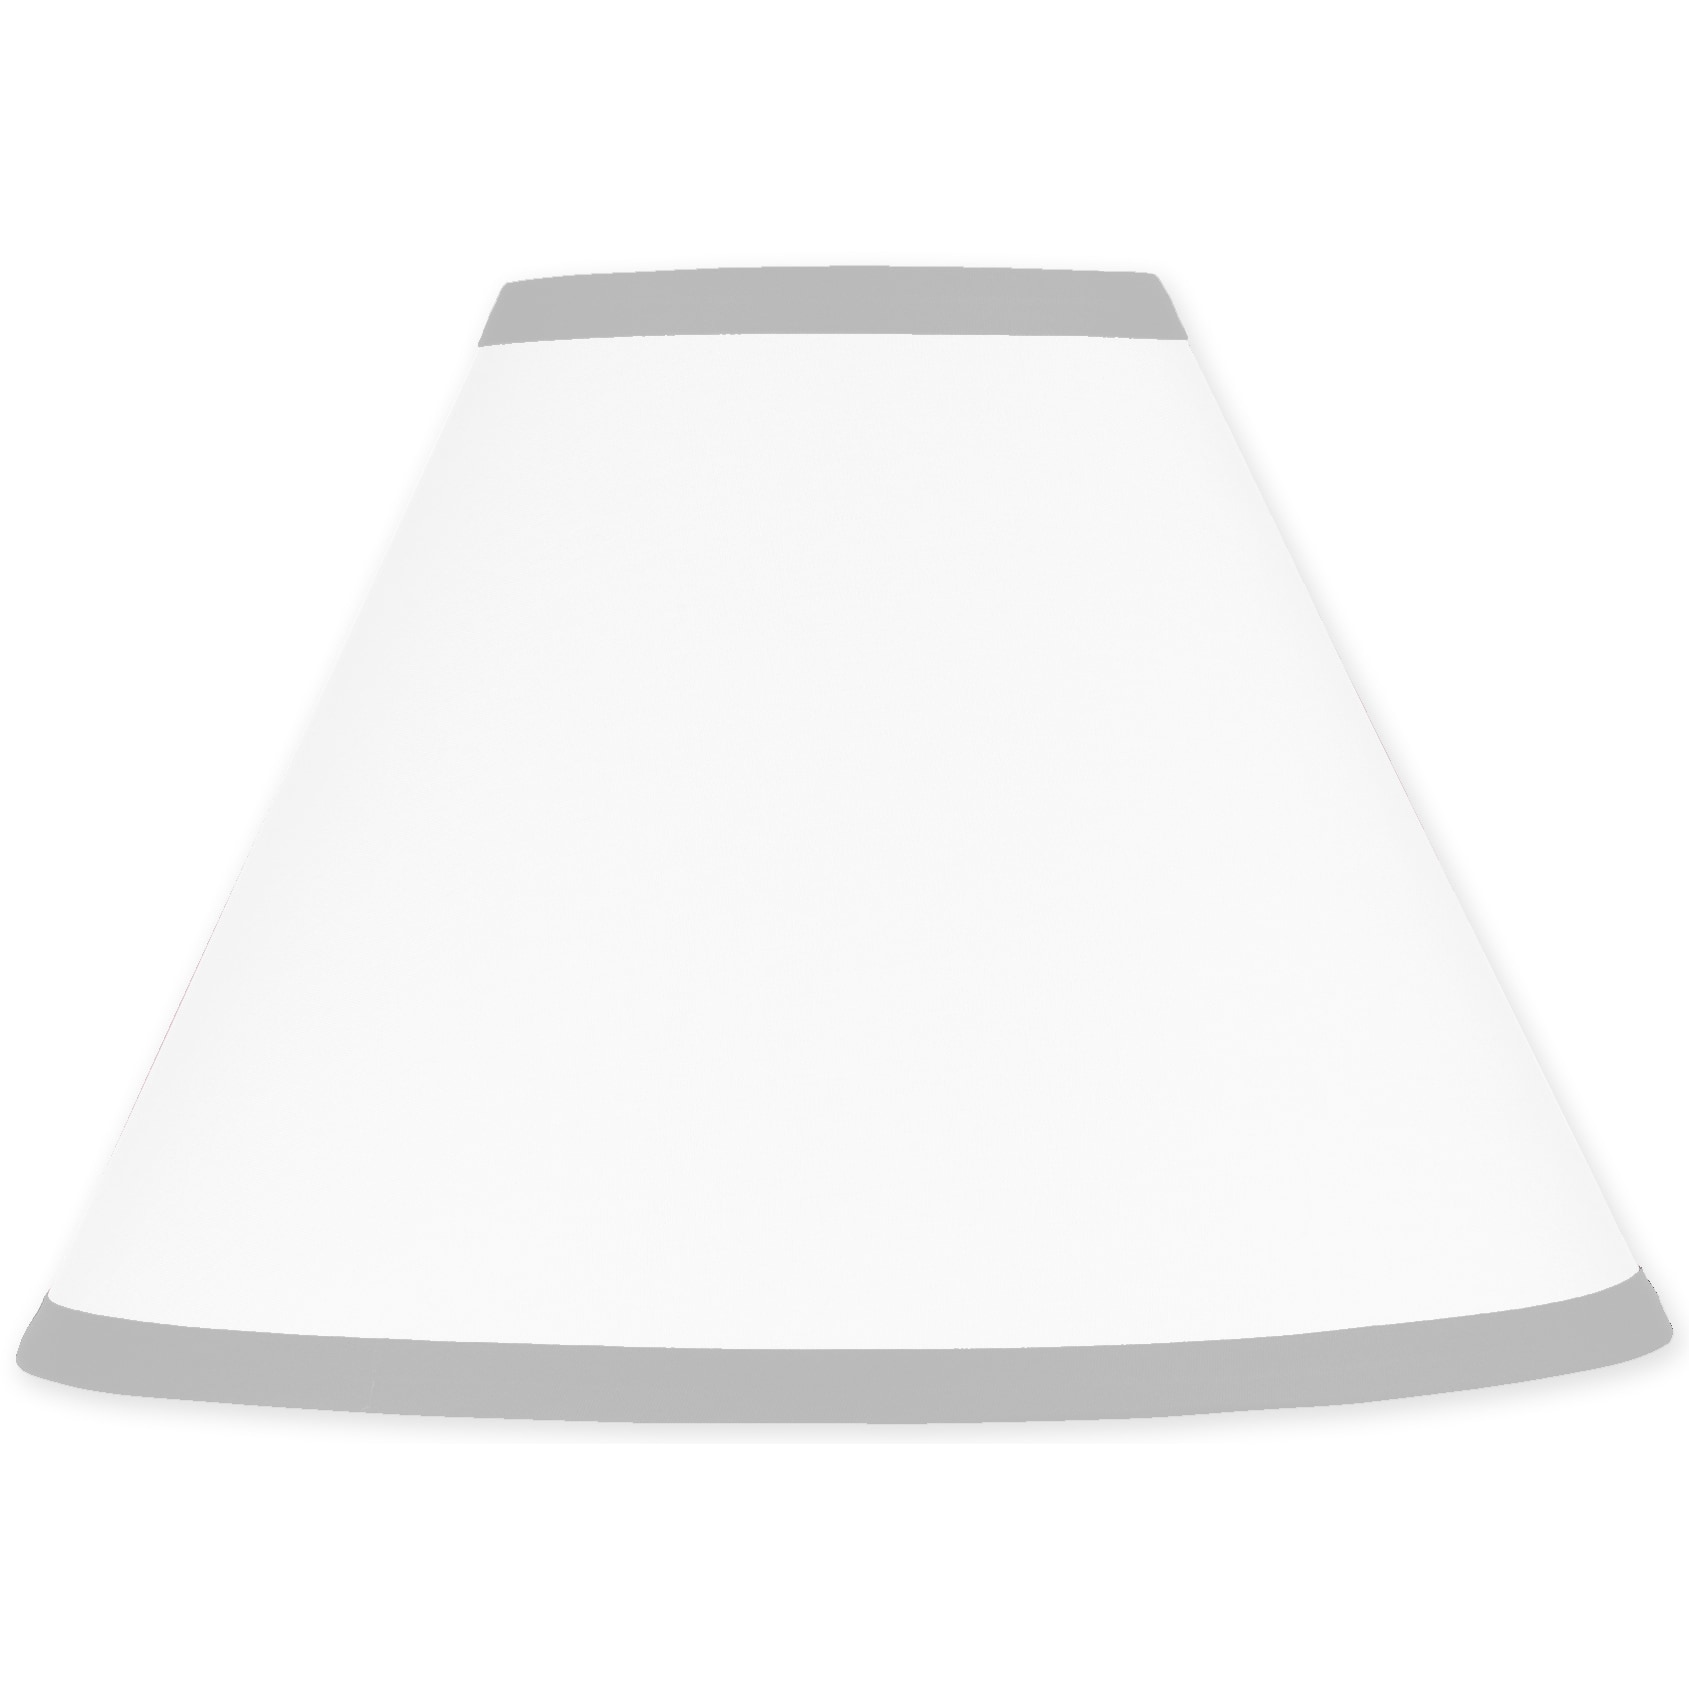 Sweet Jojo Designs White And Grey Modern Hotel Lamp Shade (White/greyMaterials 100 percent cottonDimensions 7 inches high x 10 inches bottom diameter x 4 inches top diameterThe digital images we display have the most accurate color possible. However, du